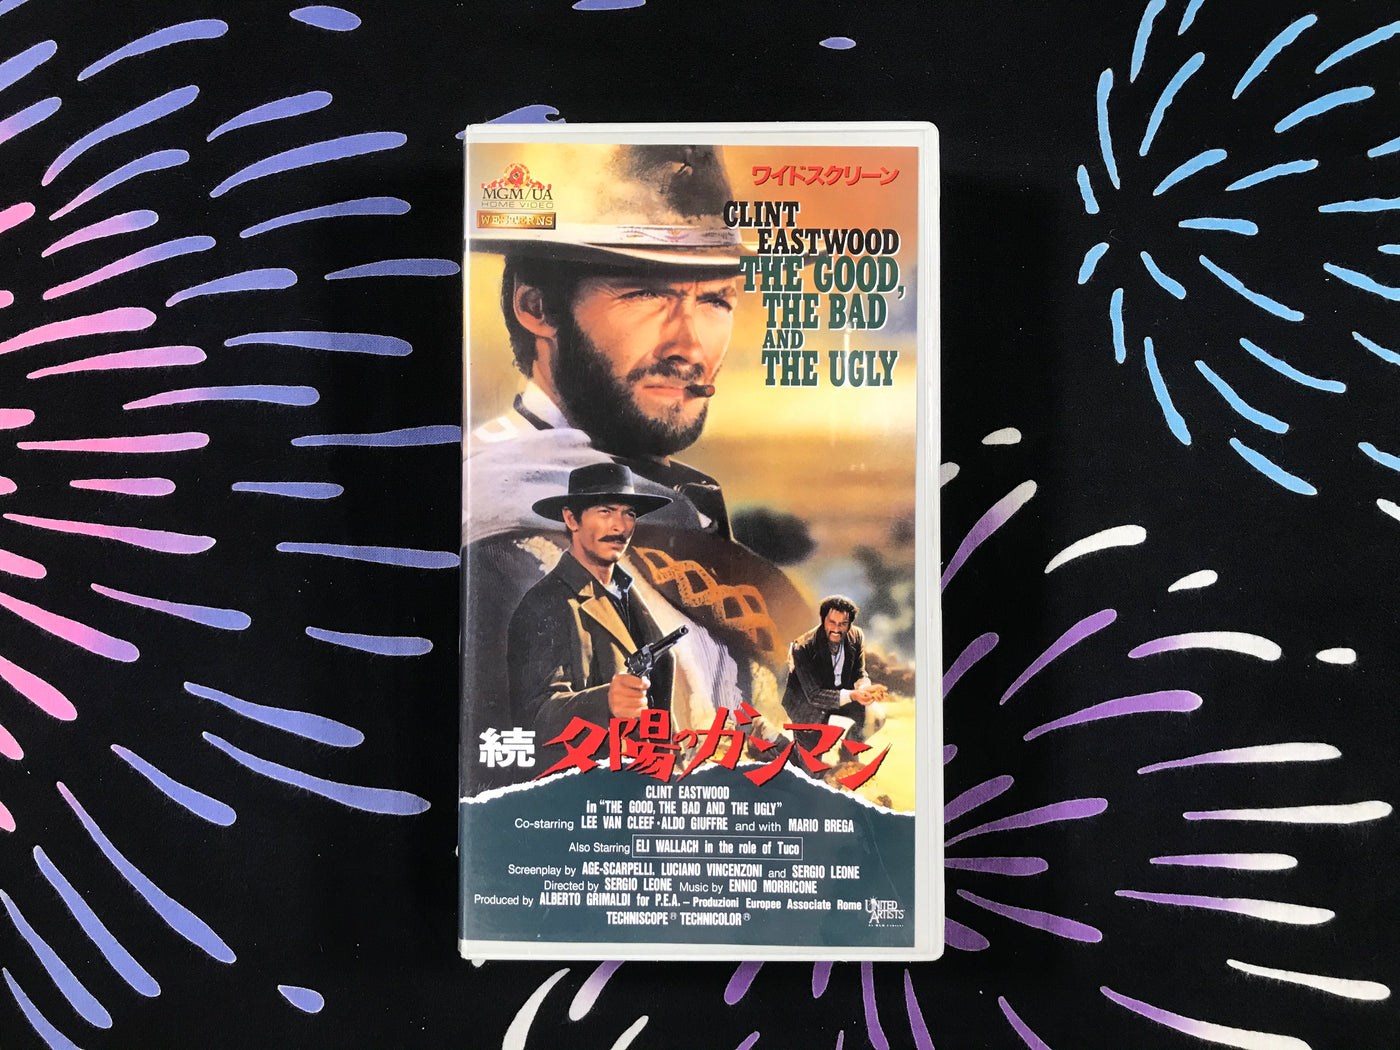 The Good, the Bad, and the Ugly VHS (1996)